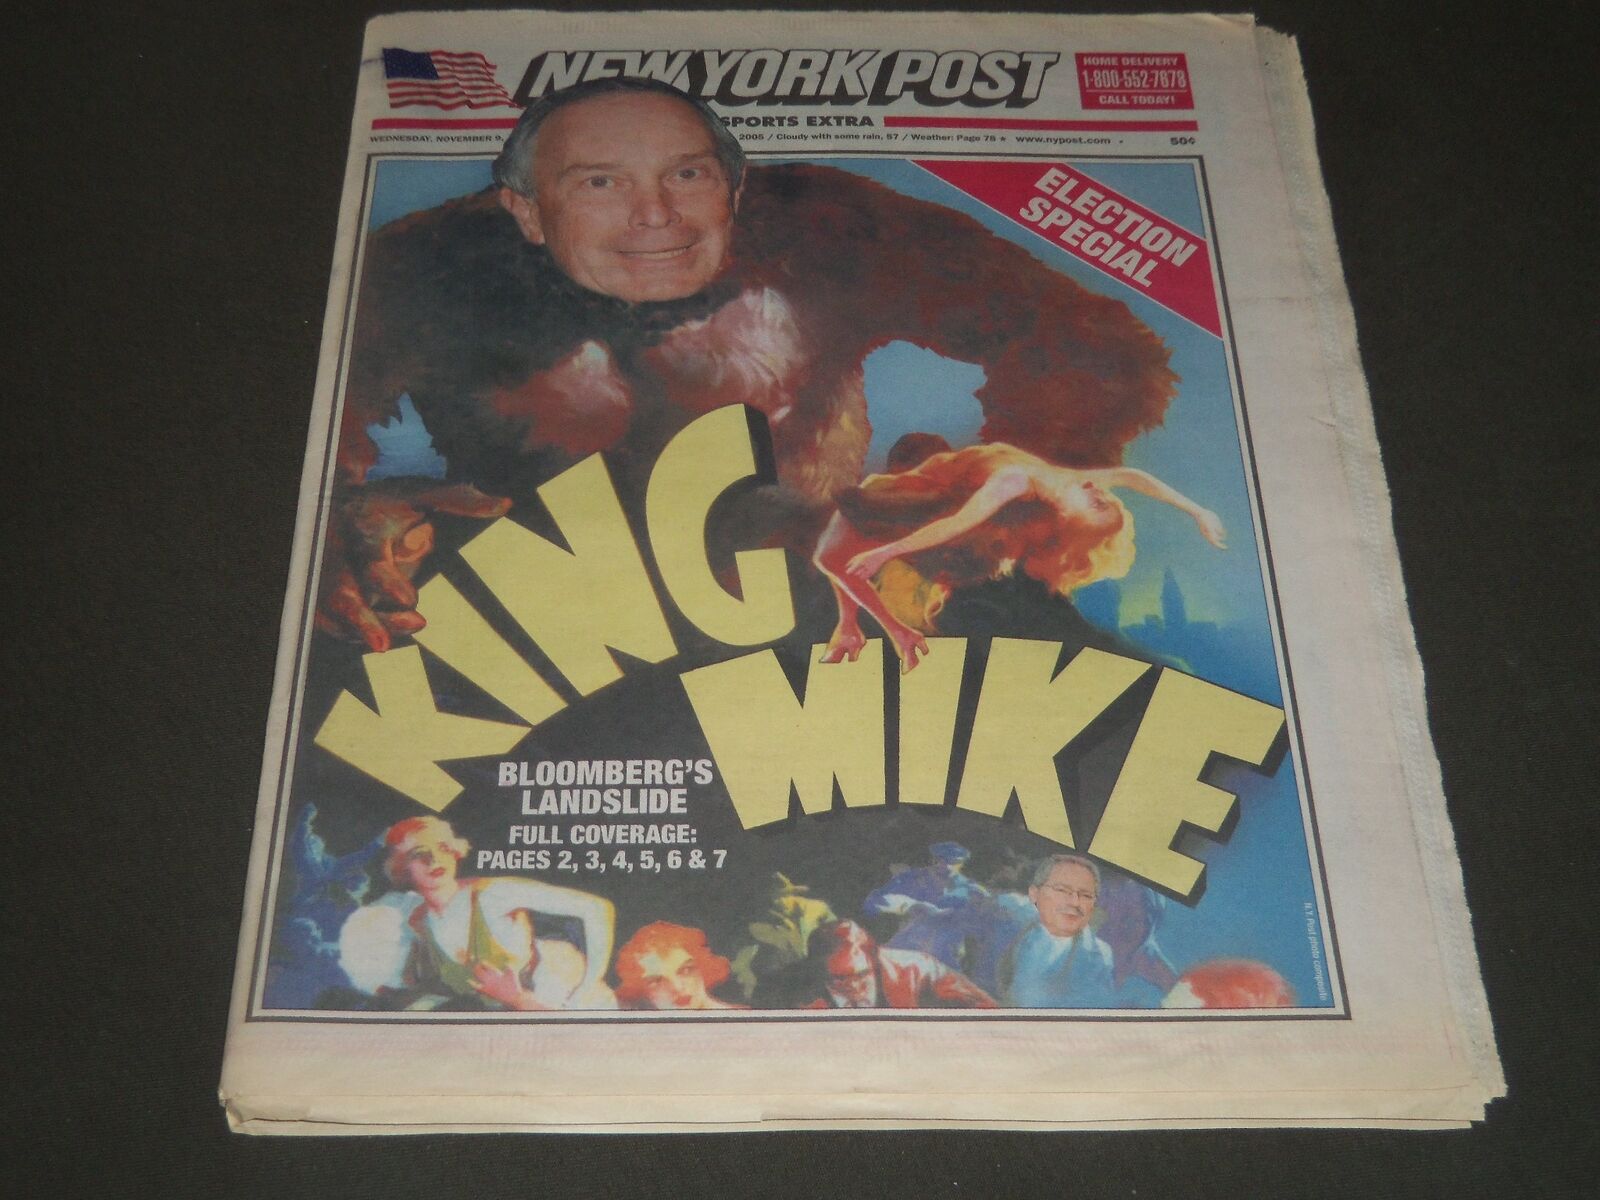 2005 NOVEMBER 9 NEW YORK POST NEWSPAPER - KING MIKE ELECTION SPECIAL - NP 2599